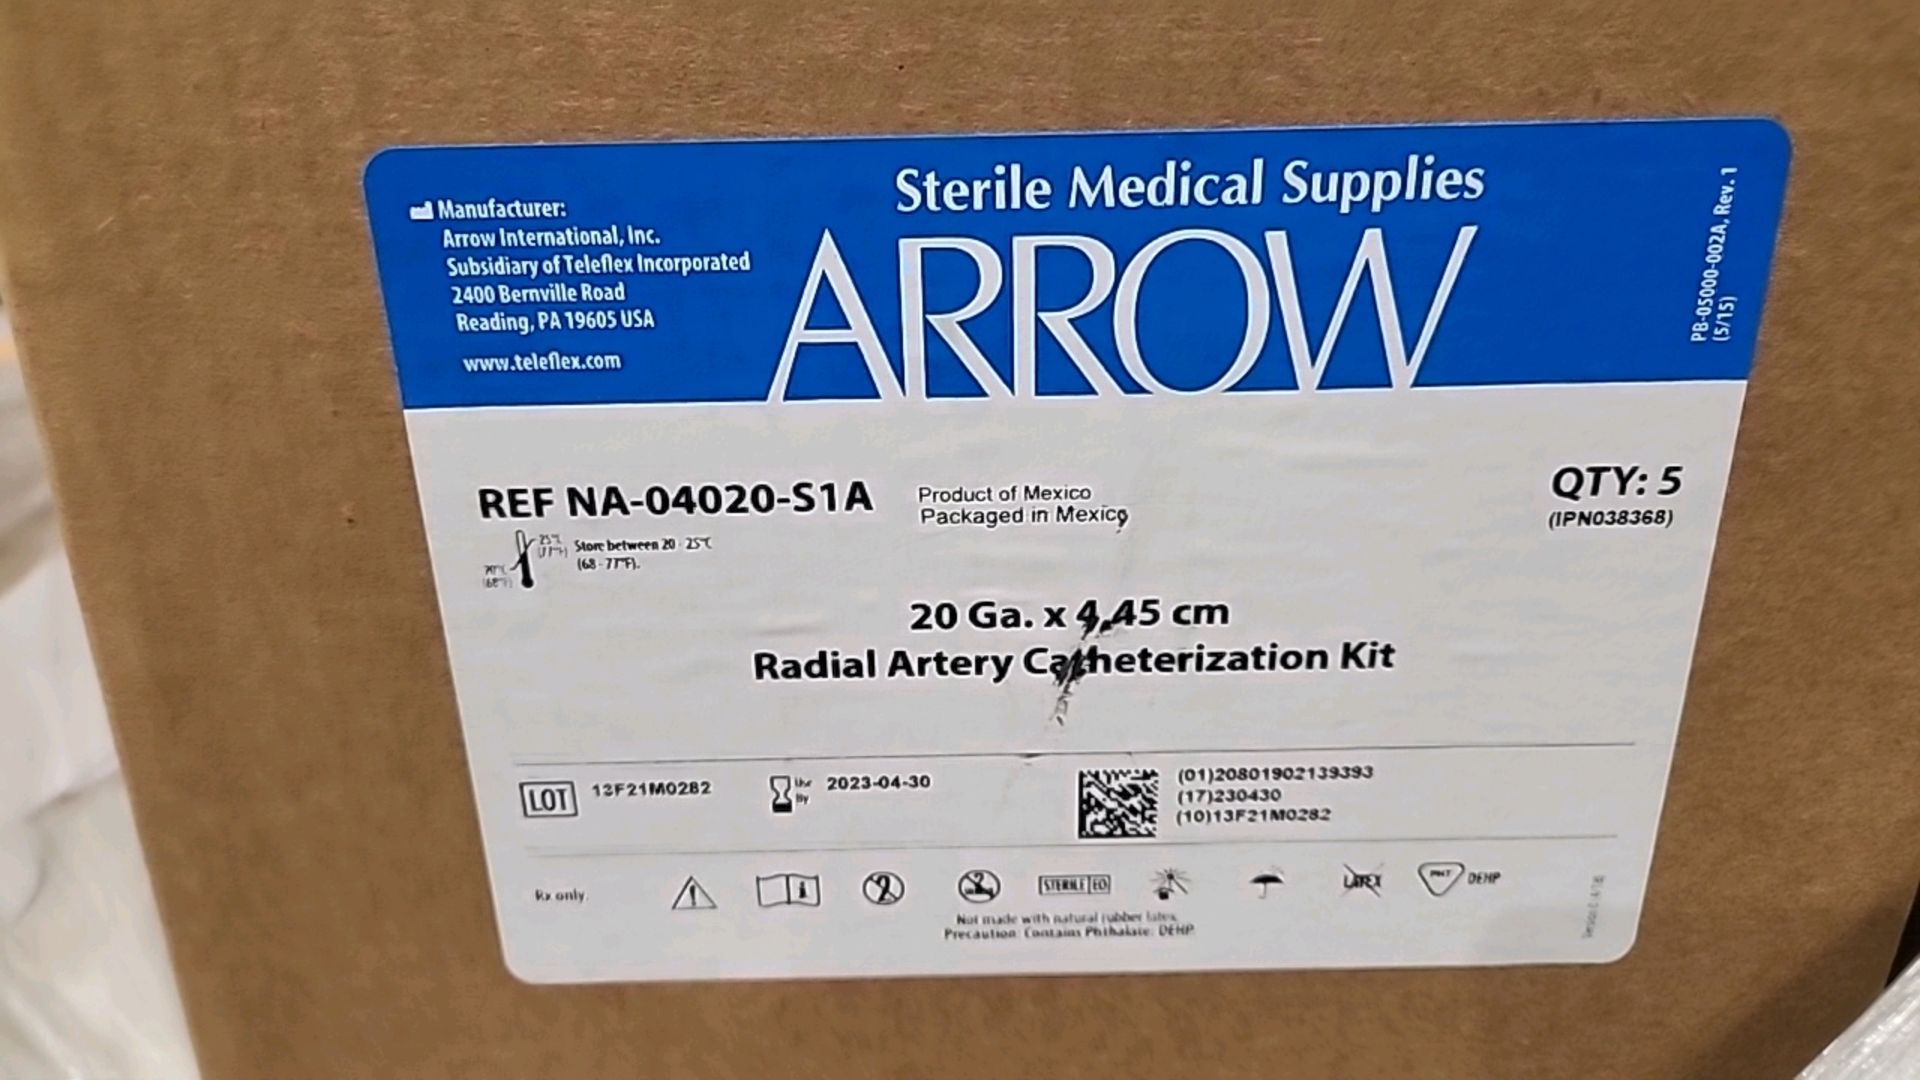 ARROW REF NA-04020-S1A RADIAL ARTERY CATHERIZATION KIT (NOT IN DATE) LOCATION: 100 GOLDEN DR. - Image 3 of 3